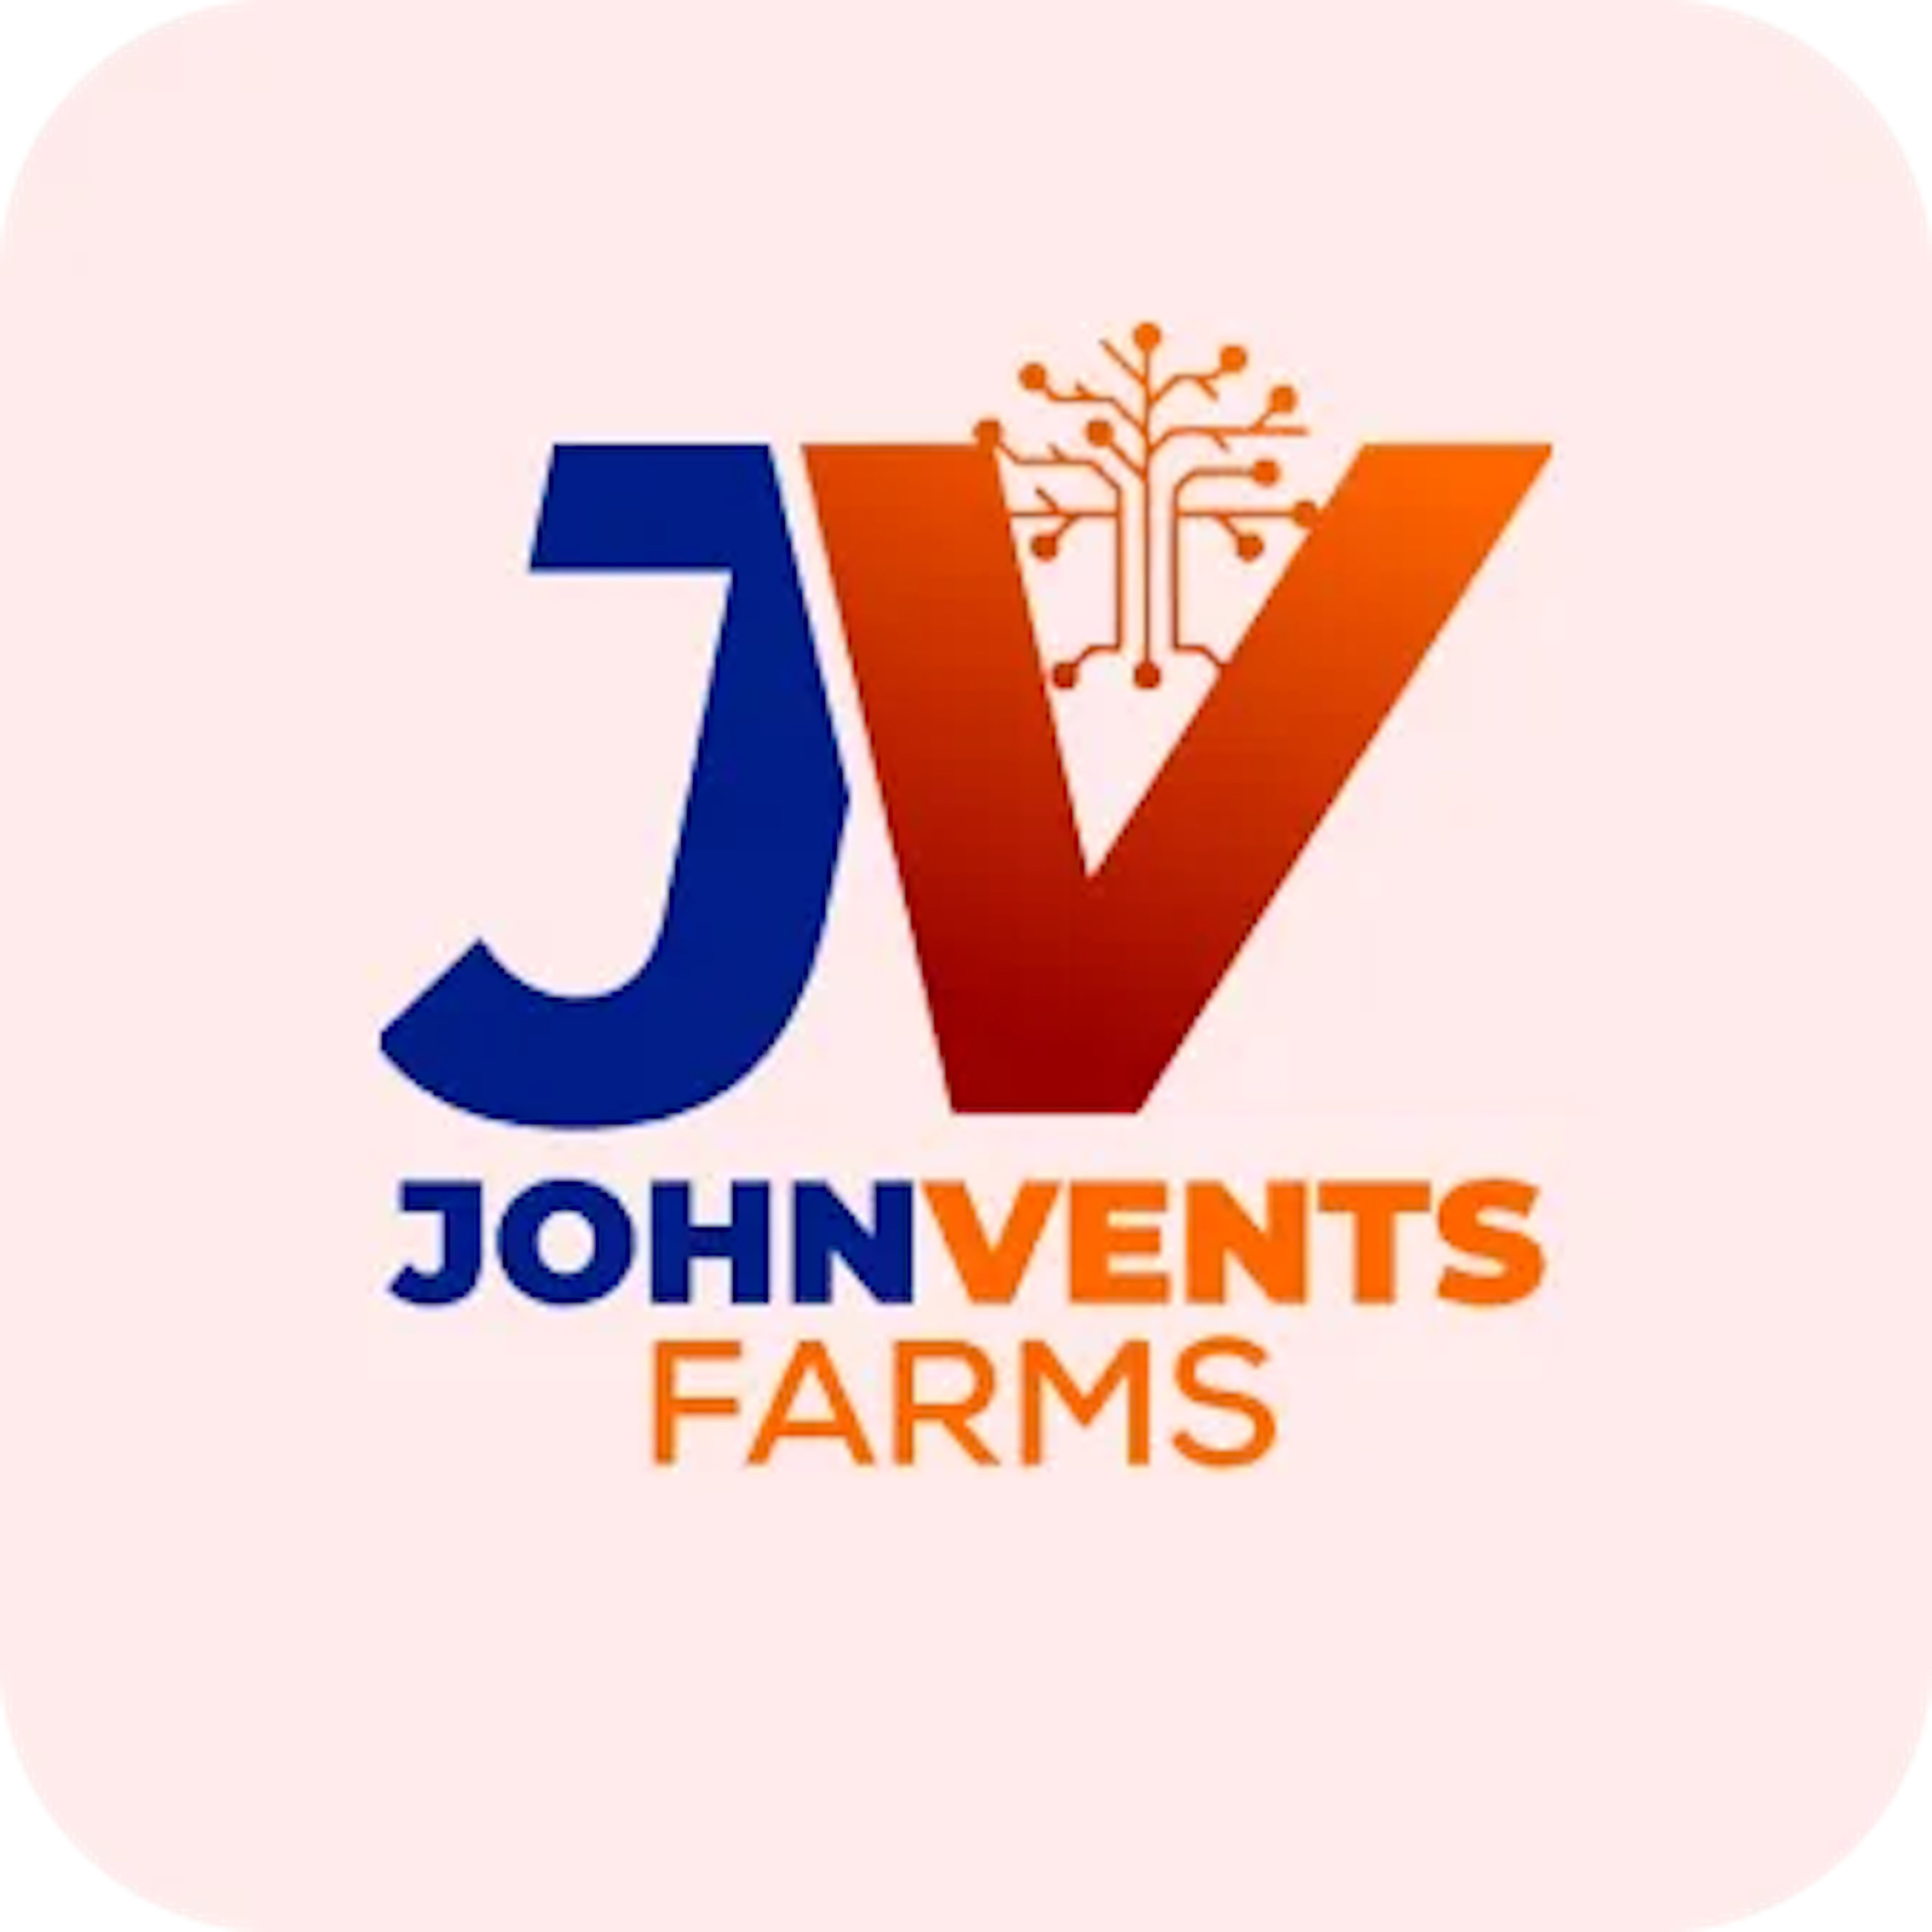 Johnvents Farms